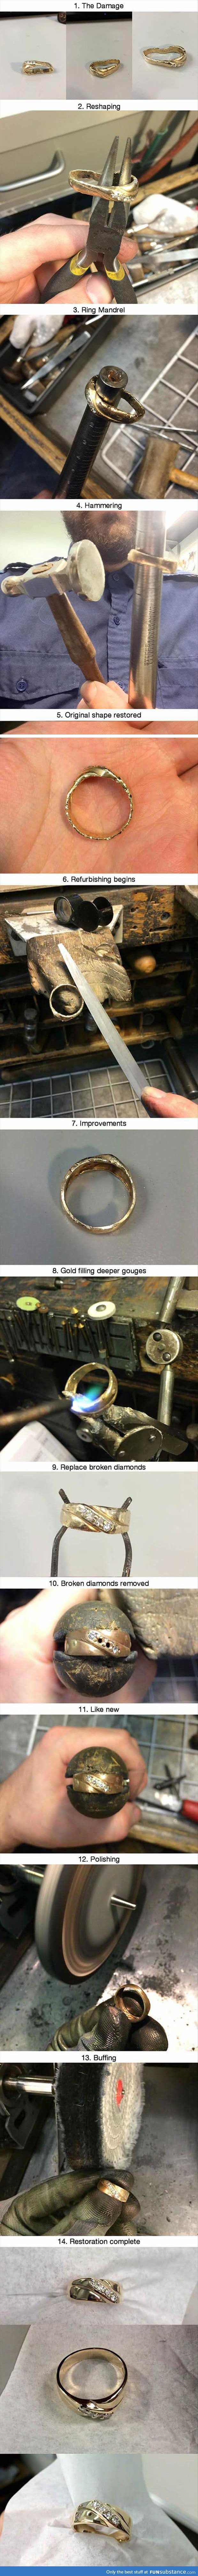 How to fix a wedding ring